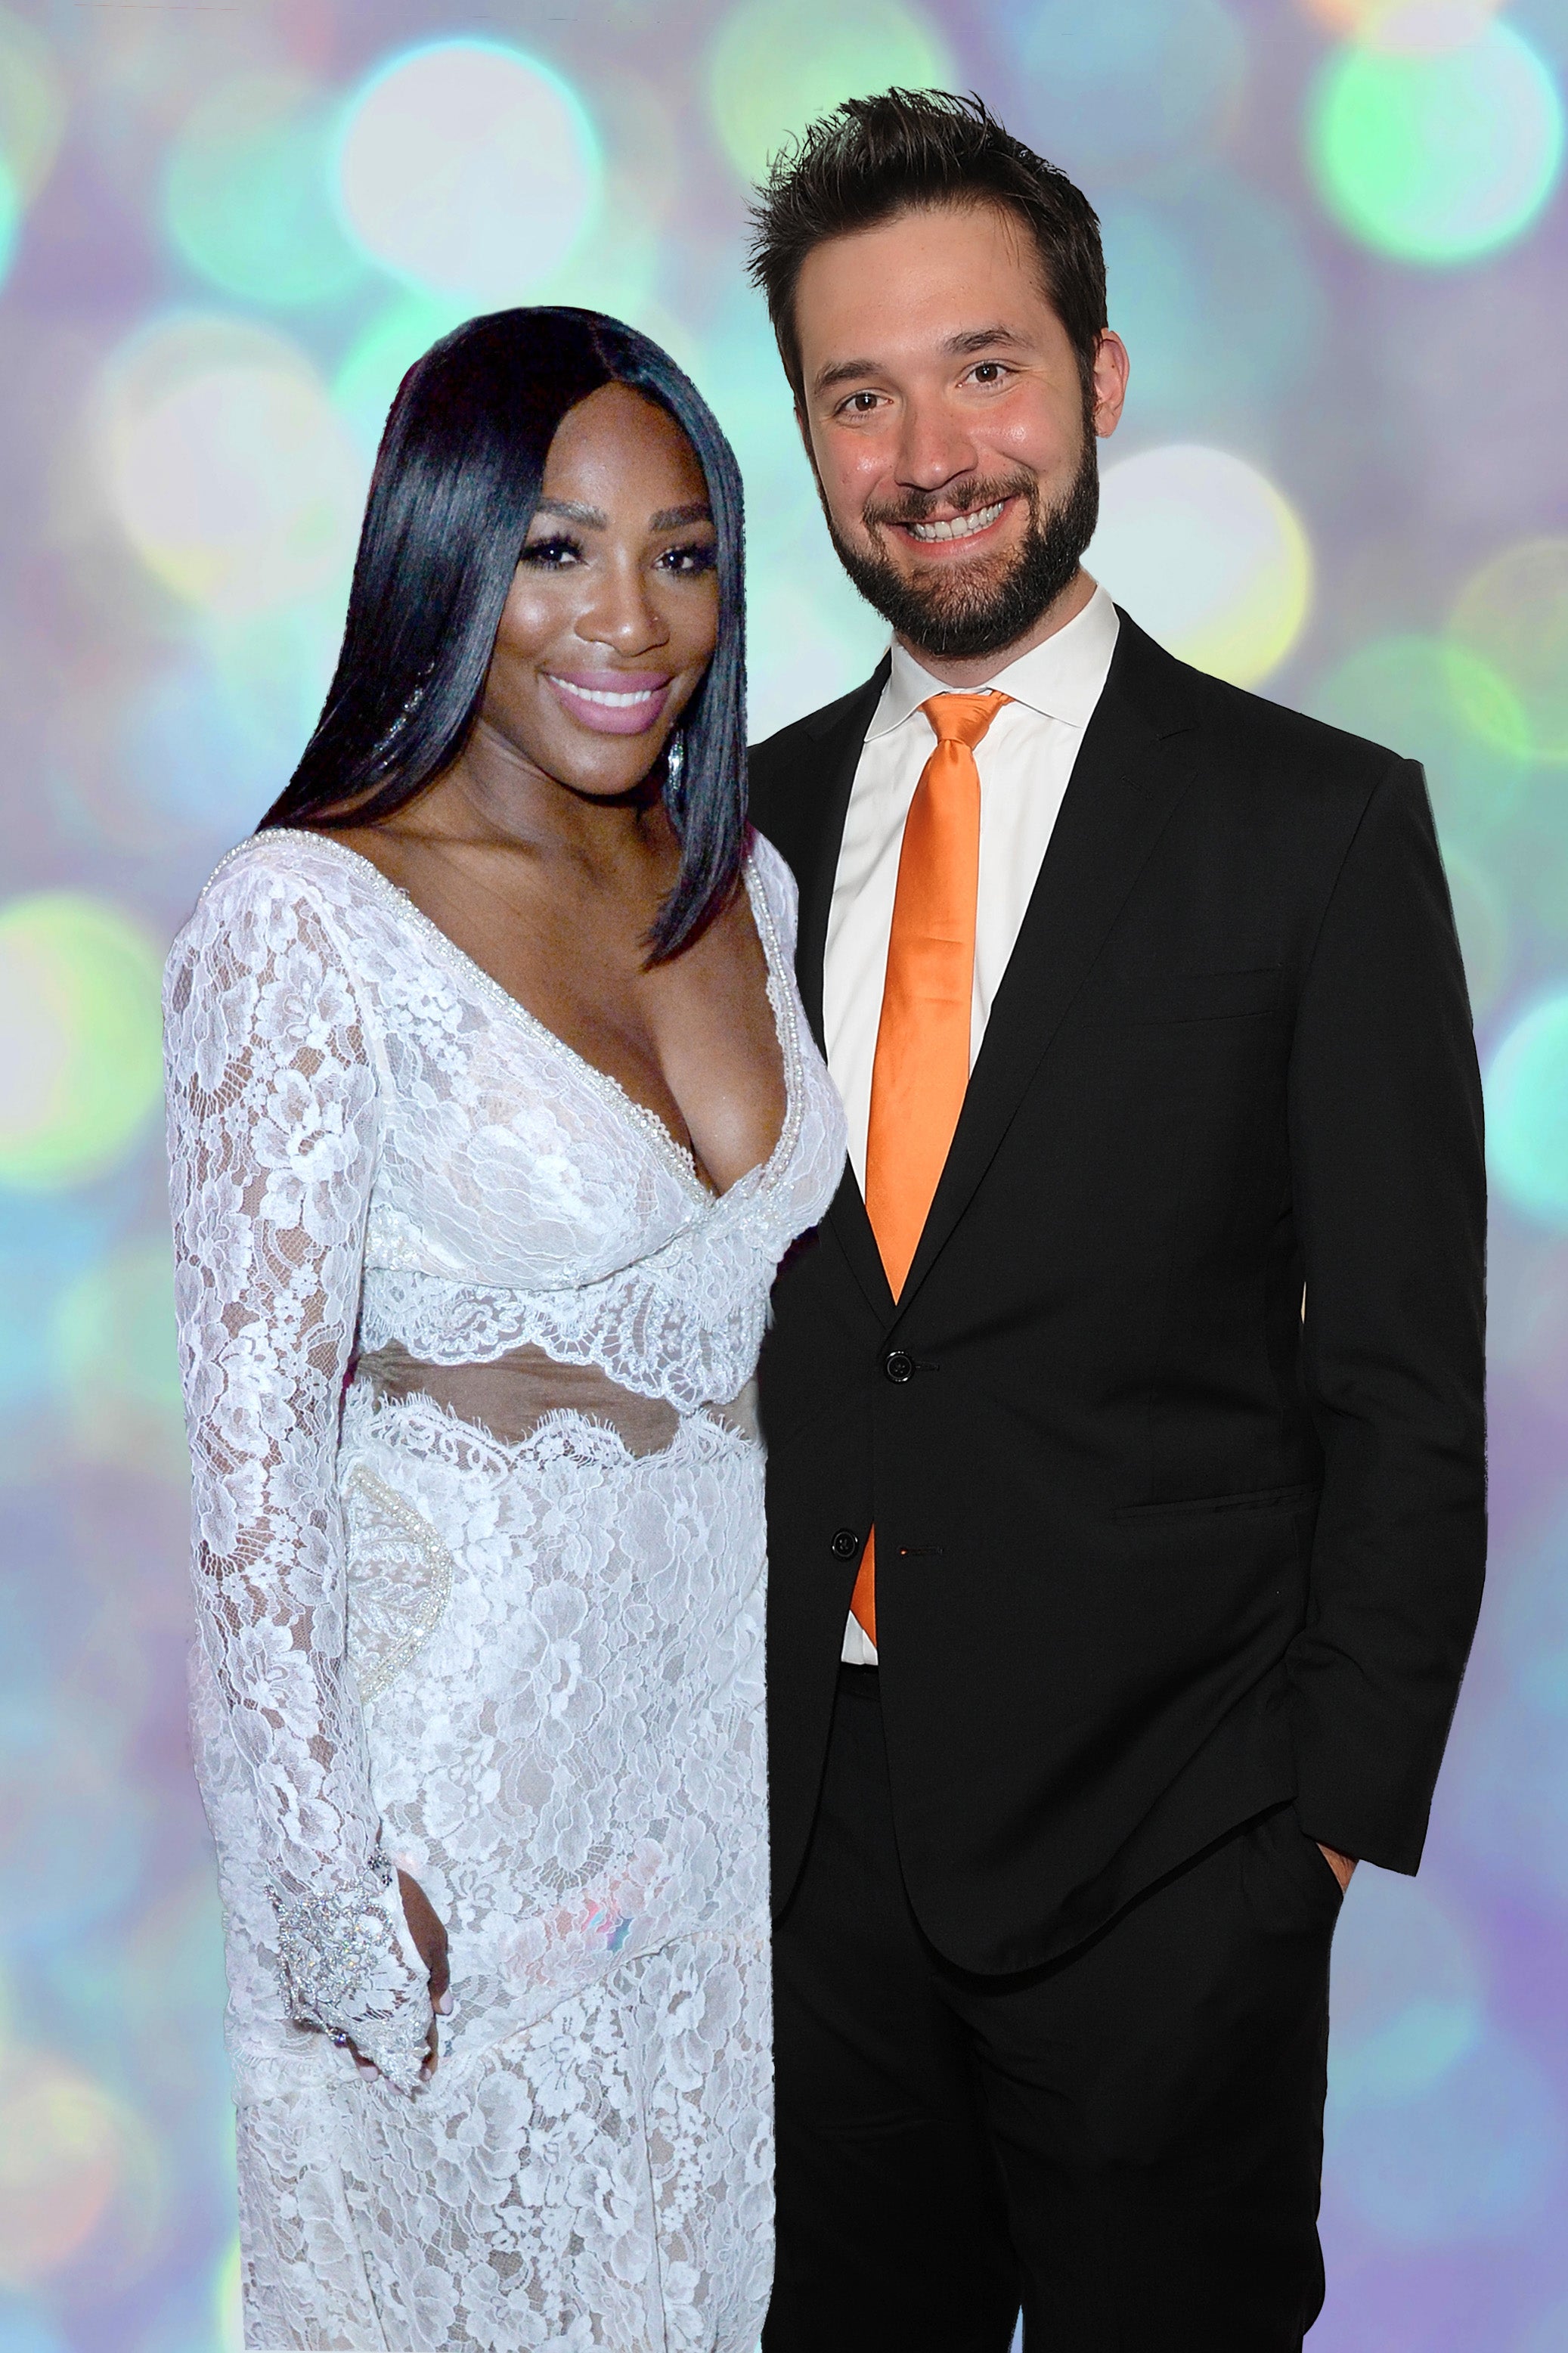 6 Things To Know About Serena Williams' New Fiancé Alexis Ohanian
